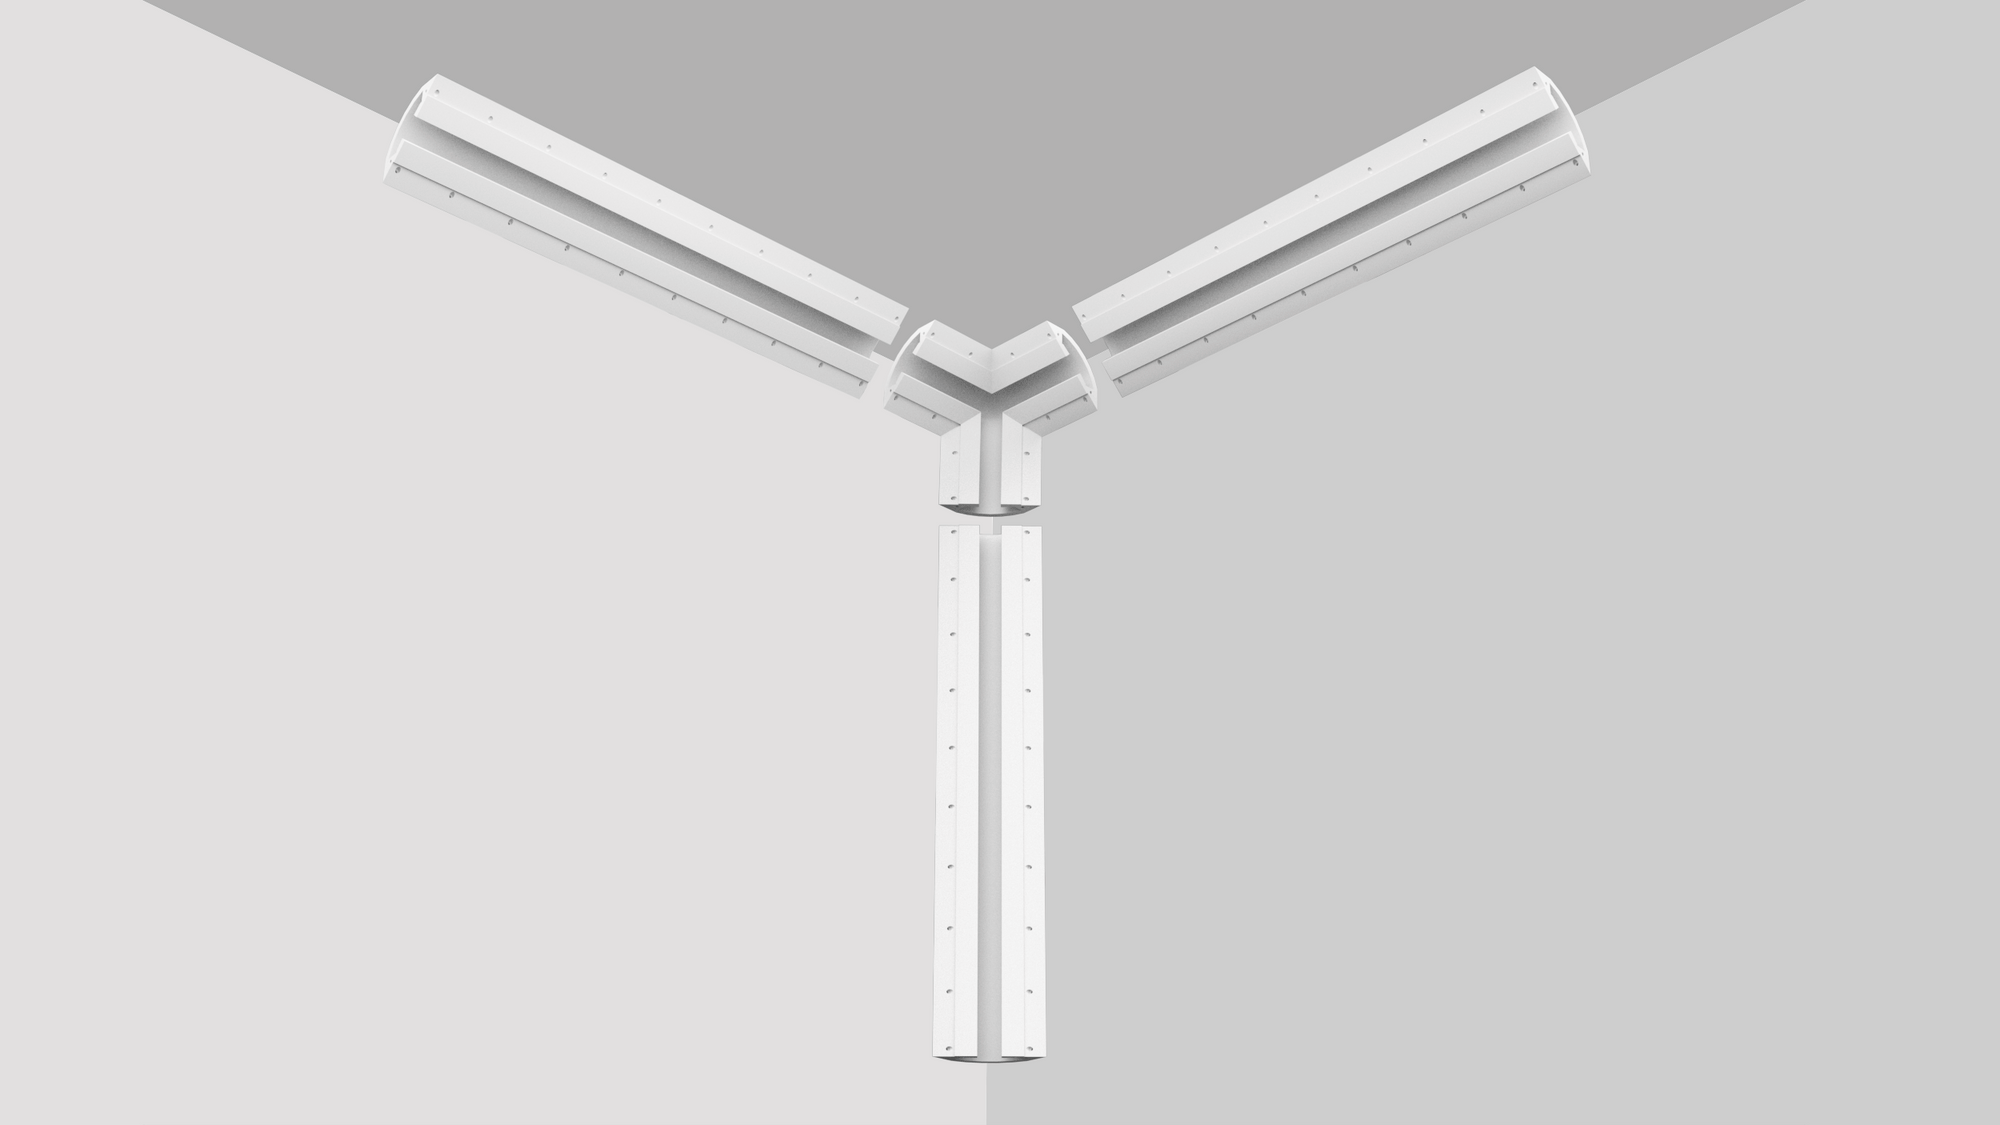 SLS-GLCC15-TRC Gypsum Lighting Crown Cove's Three-Way Corner Accessory. Dual LED Channel Three-Way Corner Accessory. Transitioning from Horizontal to Vertical Corners Made Easy. Designed for Seamless Corner Integration.